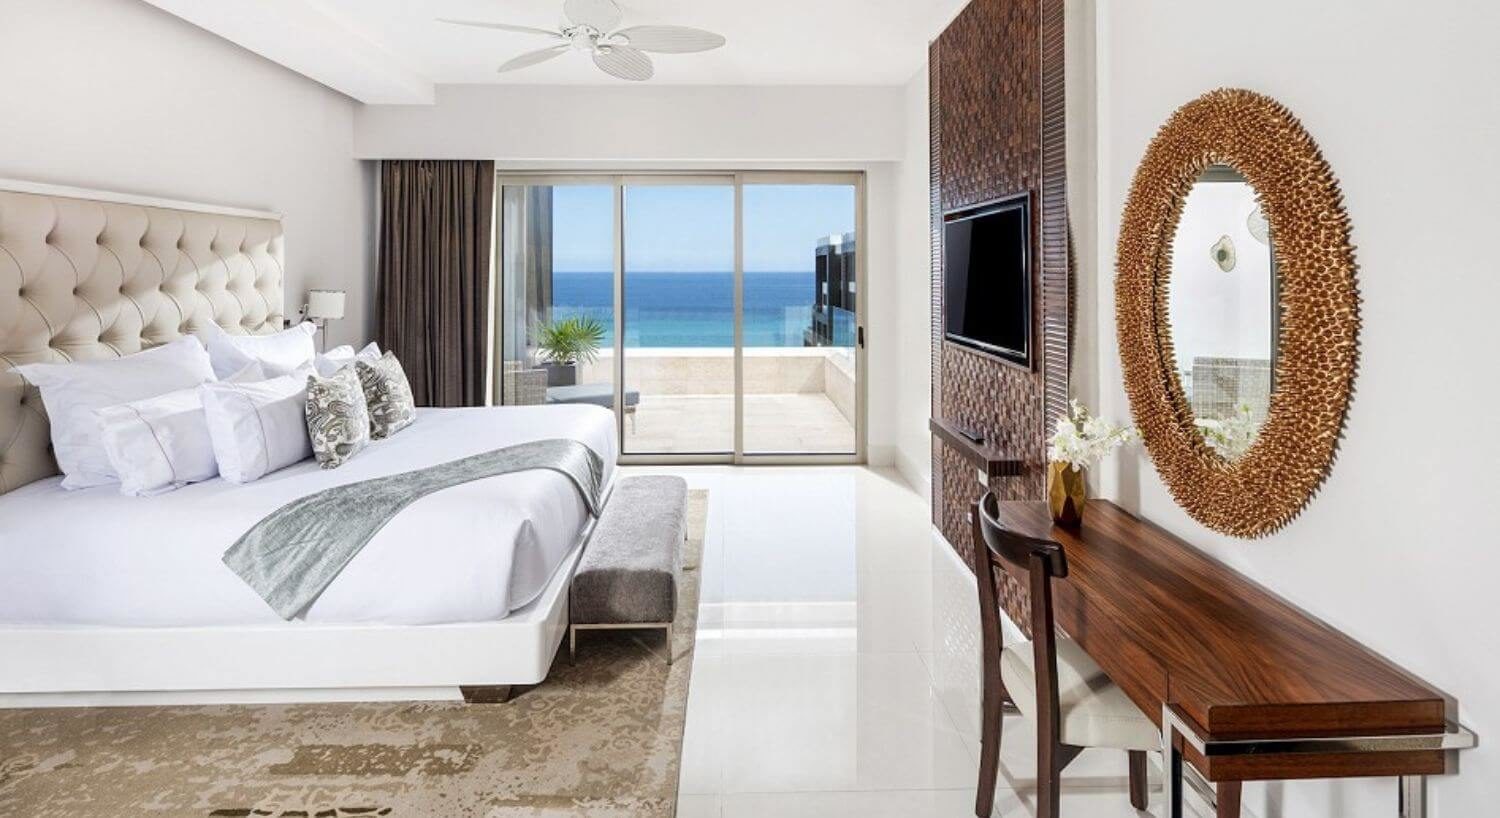 A bedroom with a King bed, plush headboard, sitting bench at the foot of the bed, a writing desk and chair with mirror above it, a flat screen TV on the wall opposite the bed, and sliding doors out to a private balcony with patio furniture and ocean views.